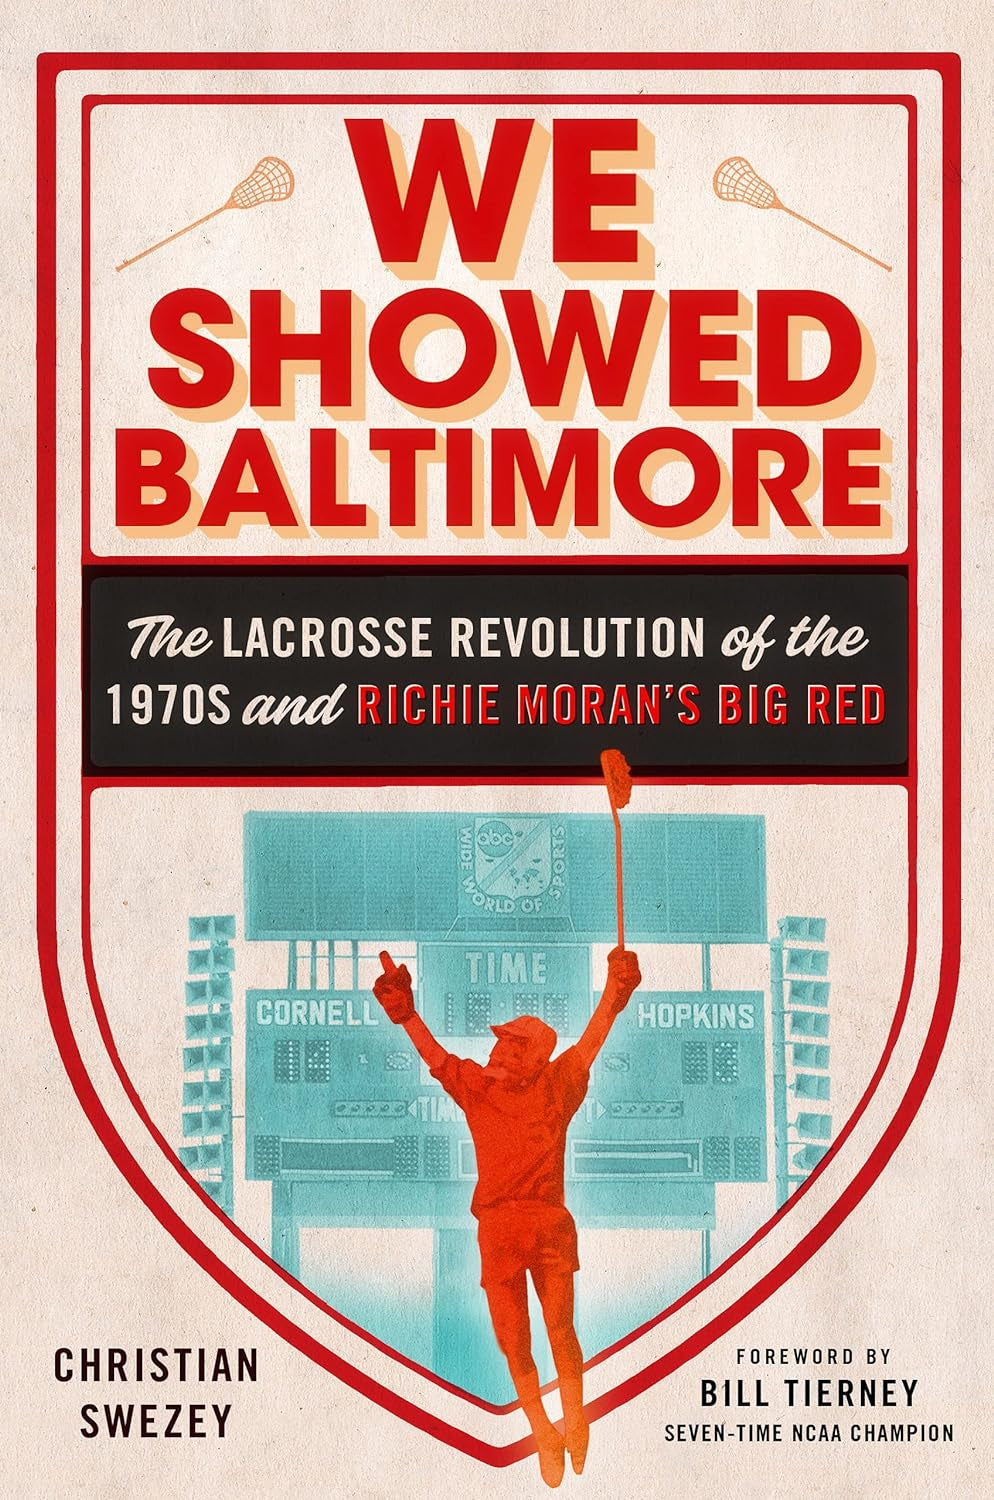 We Showed Baltimore: The Lacrosse Revolution of the 1970s and Richie Moran's Big Red- Front 